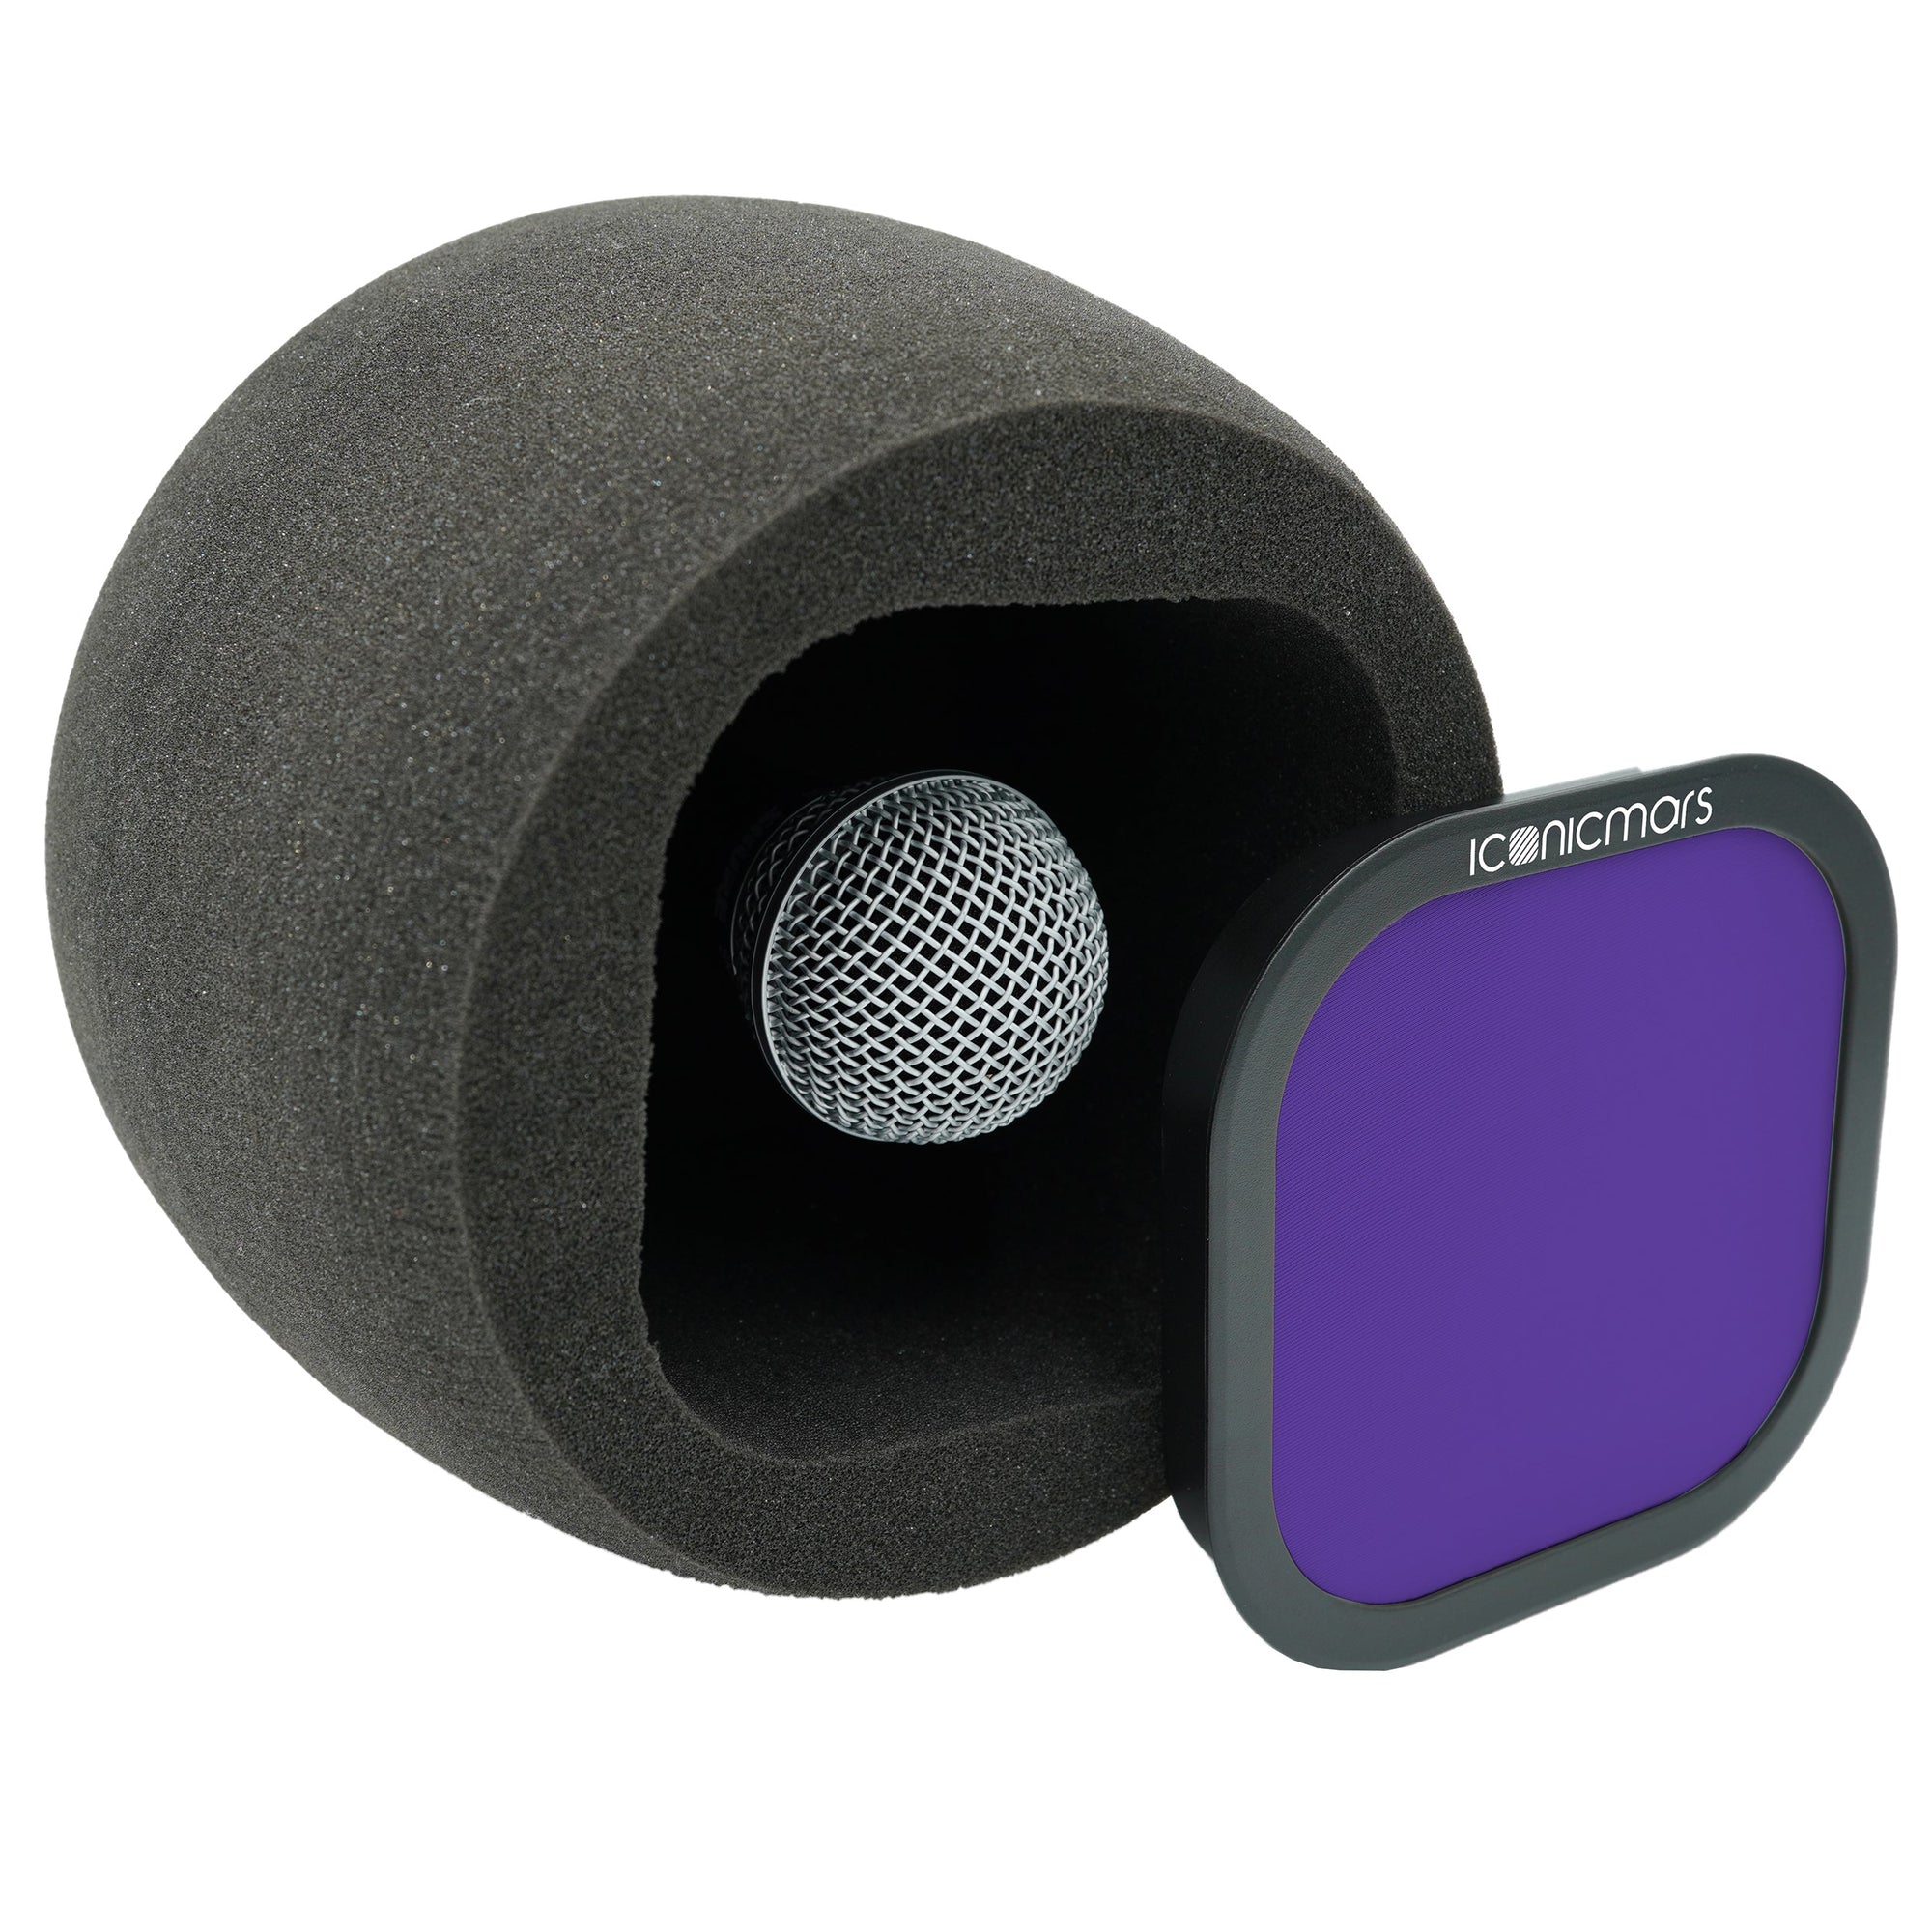 Comet X7A side view with pop filter off showing mic chamber, eyeball like design for front facing micrphone  -- Midnight Purple